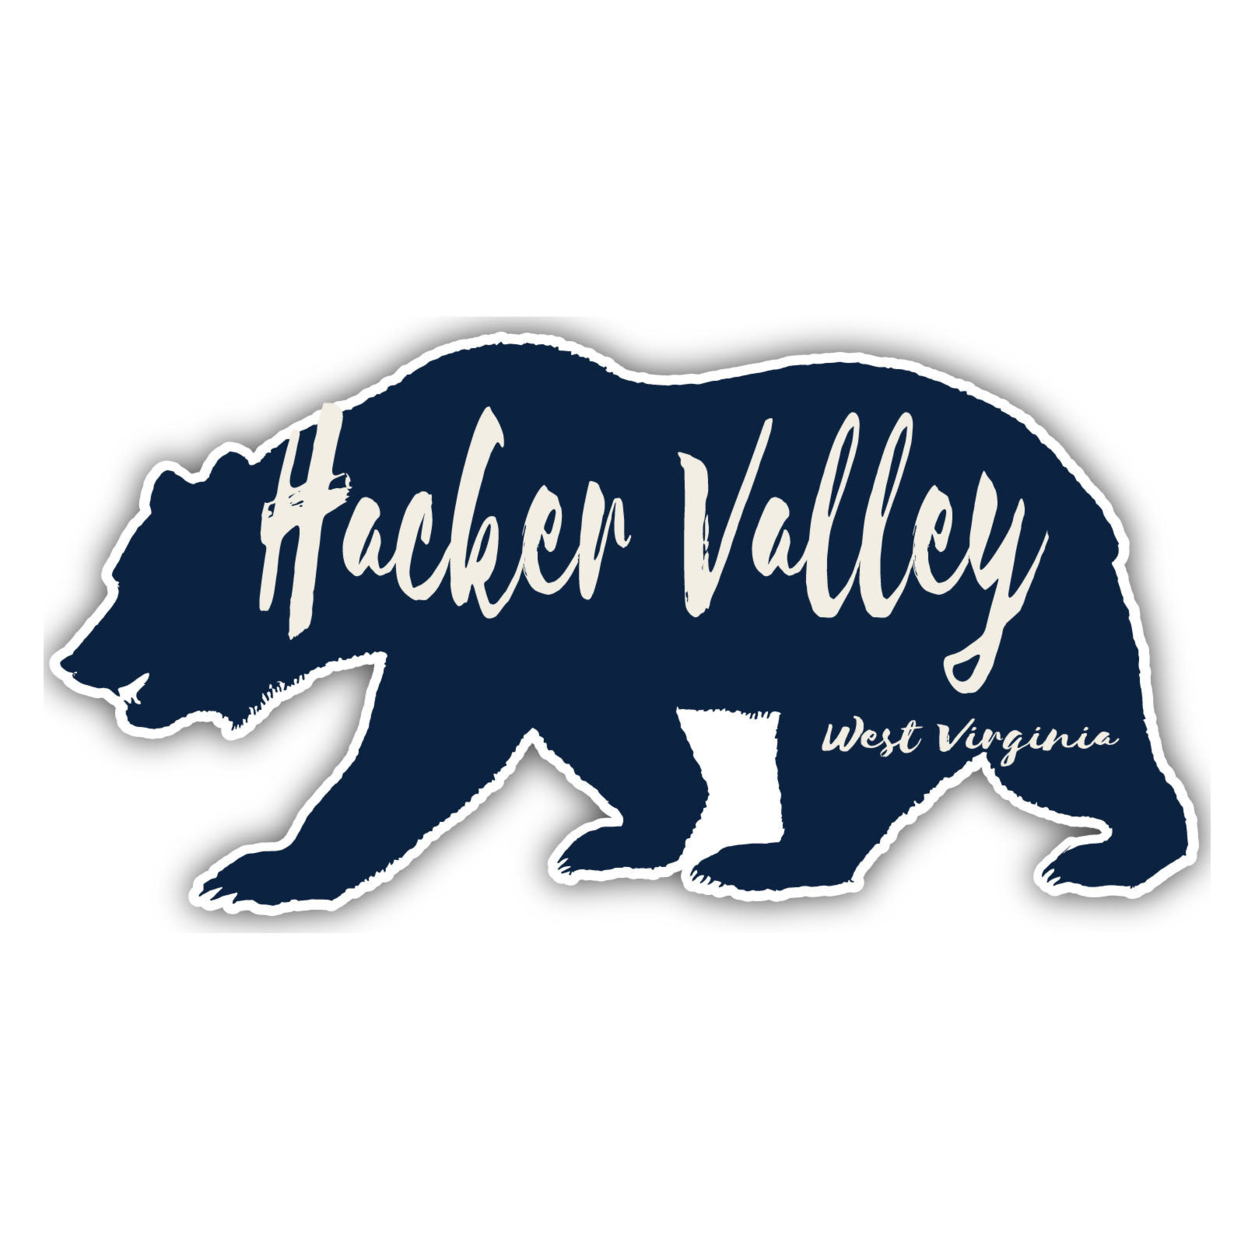 Hacker Valley West Virginia Souvenir Decorative Stickers (Choose Theme And Size) - Single Unit, 4-Inch, Great Outdoors